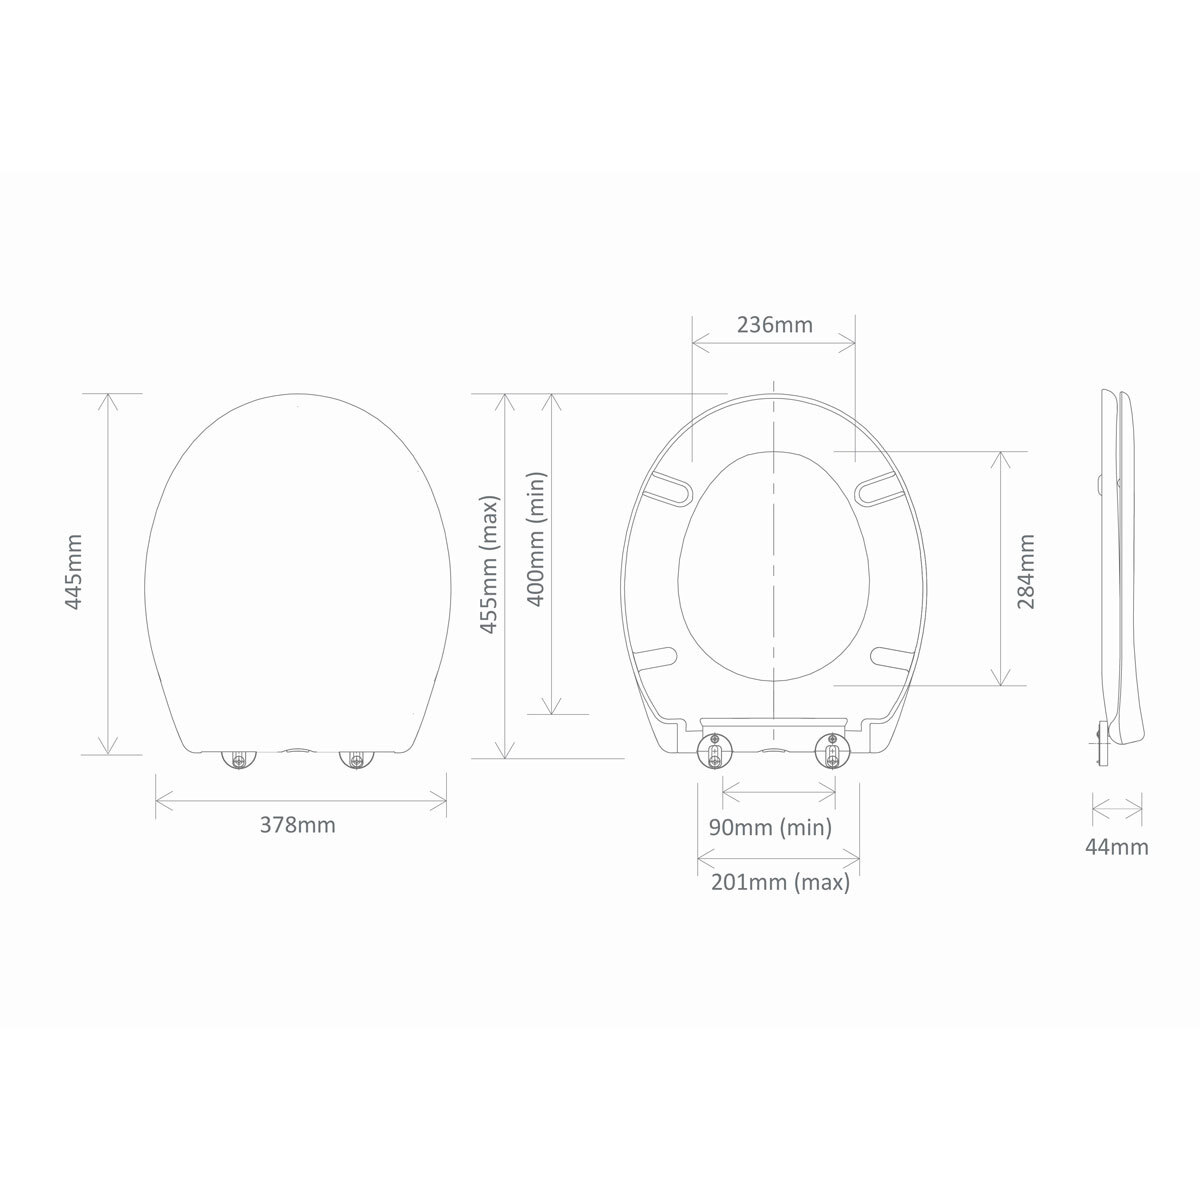 Line drawing of toilet seat on white background with dimensions